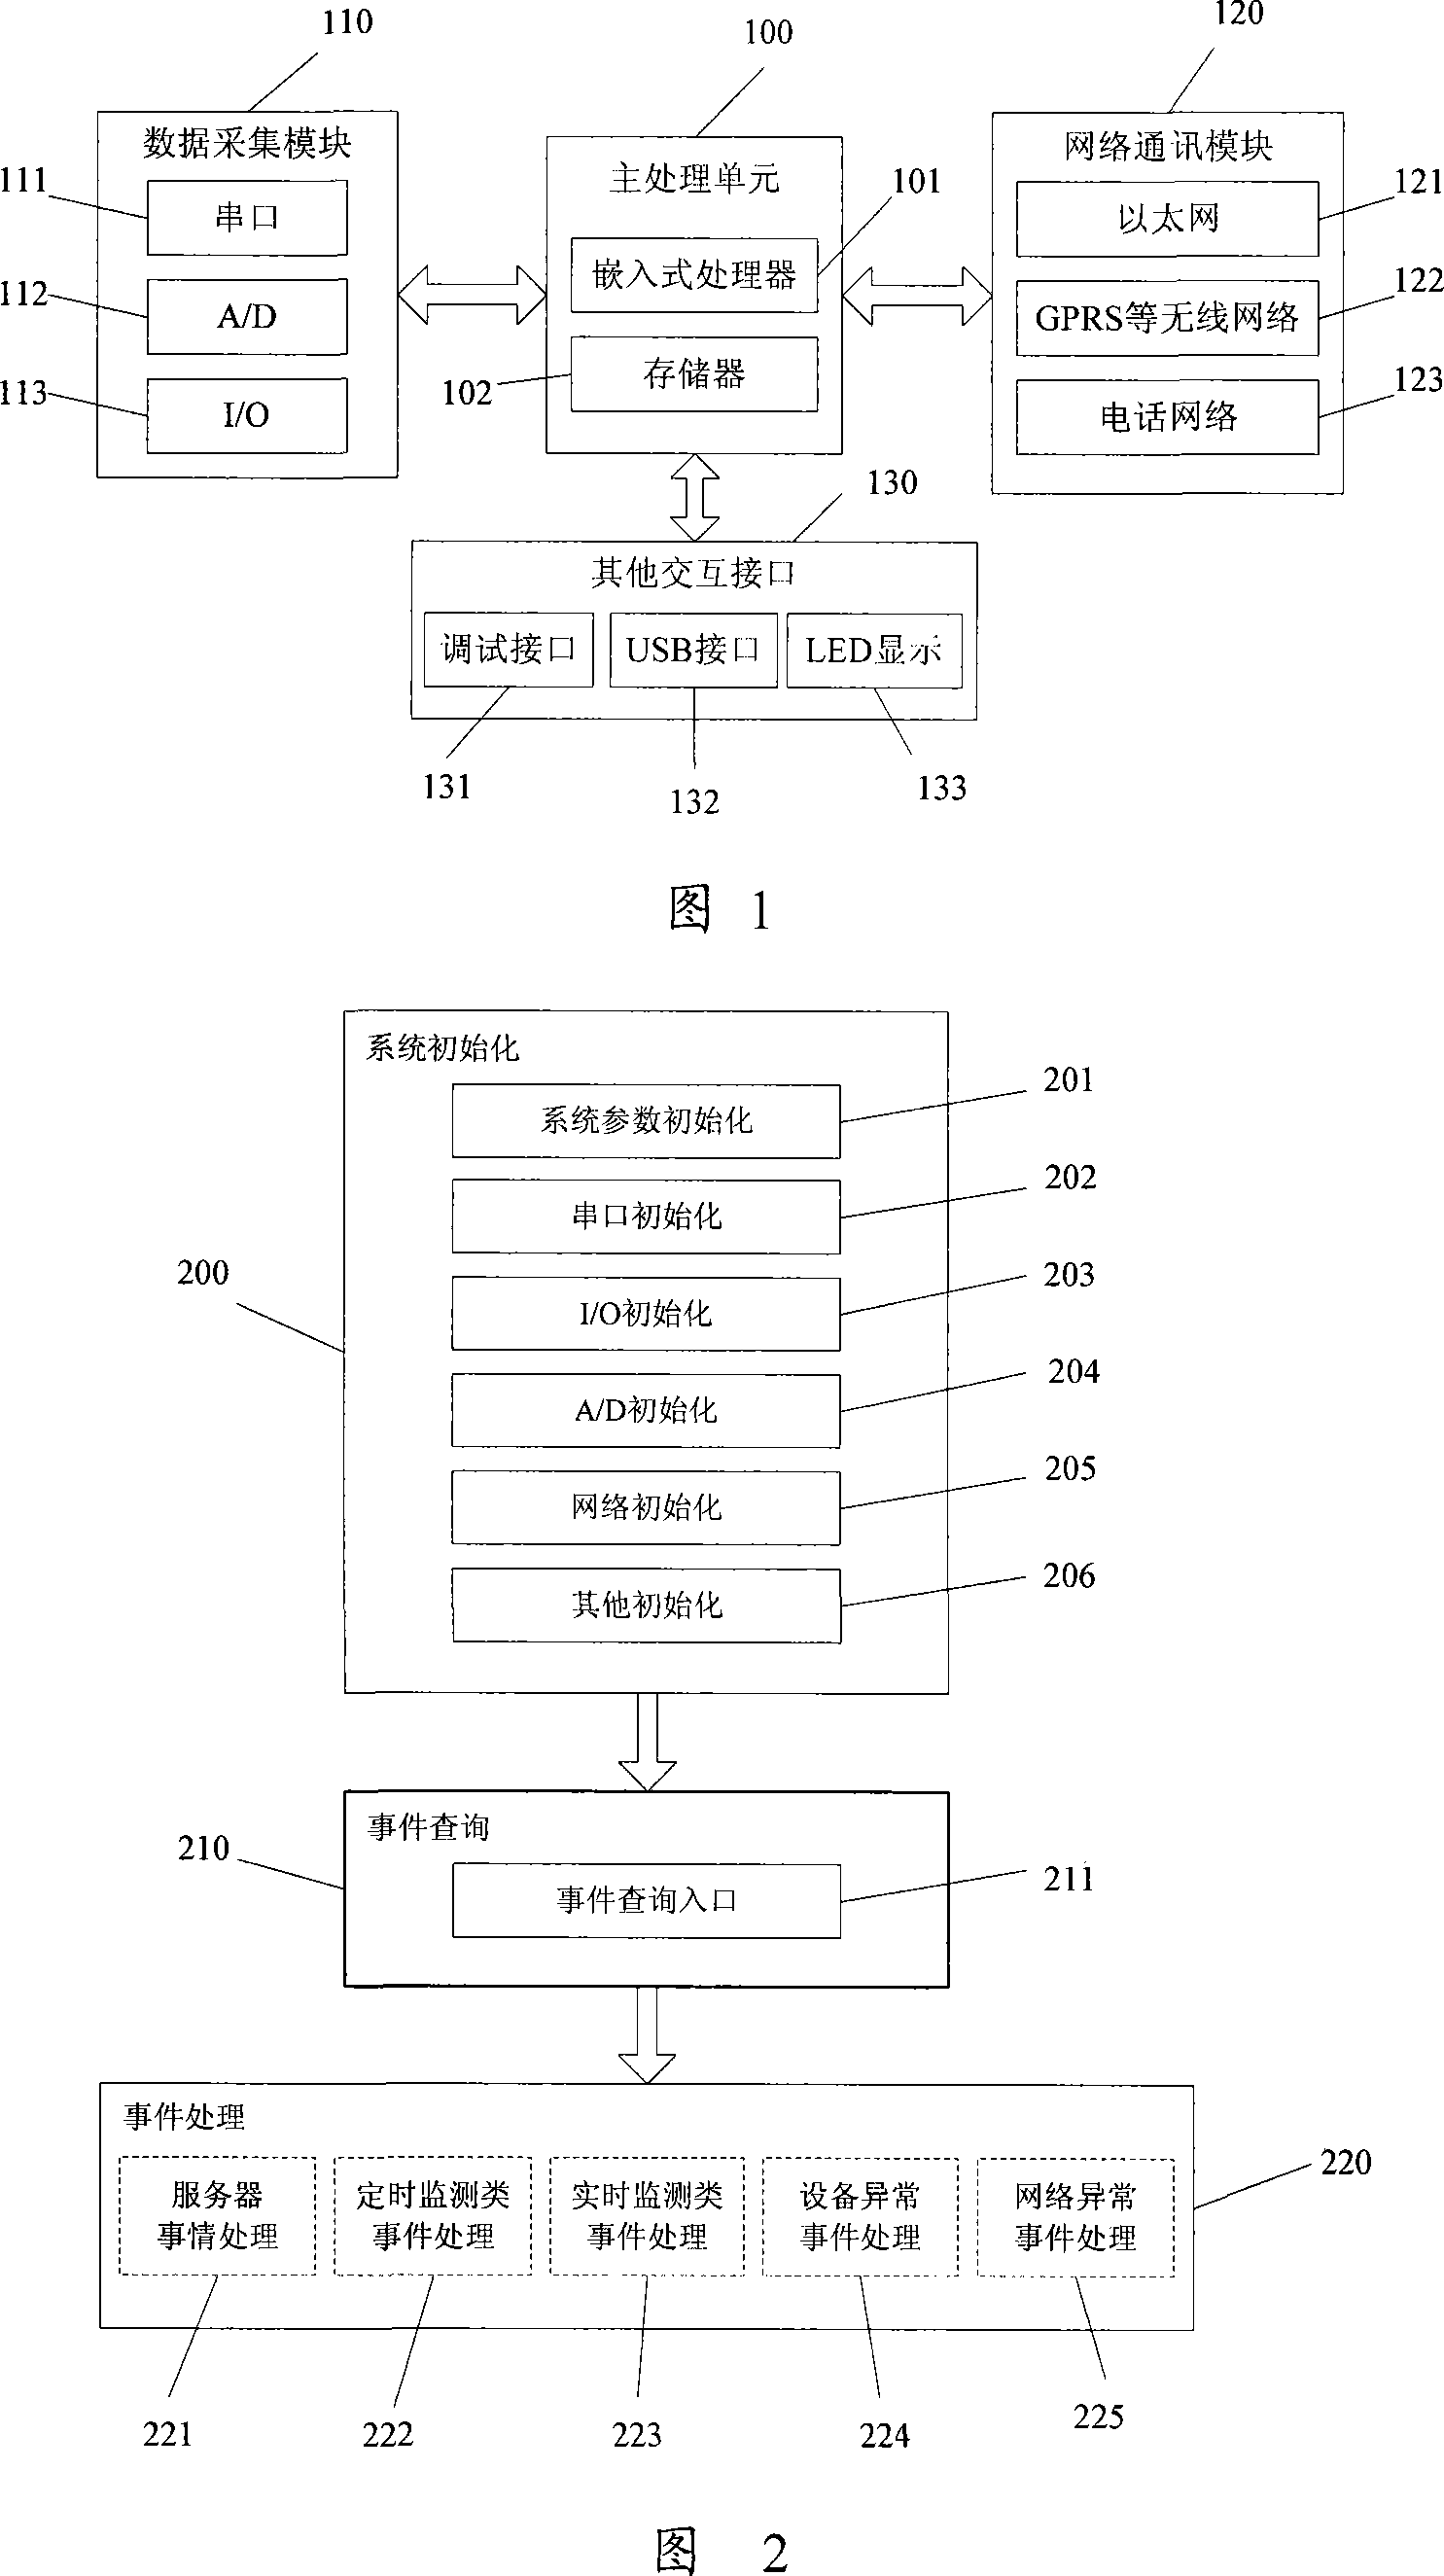 Embedded type software application frame facing network monitoring instrument and its uses